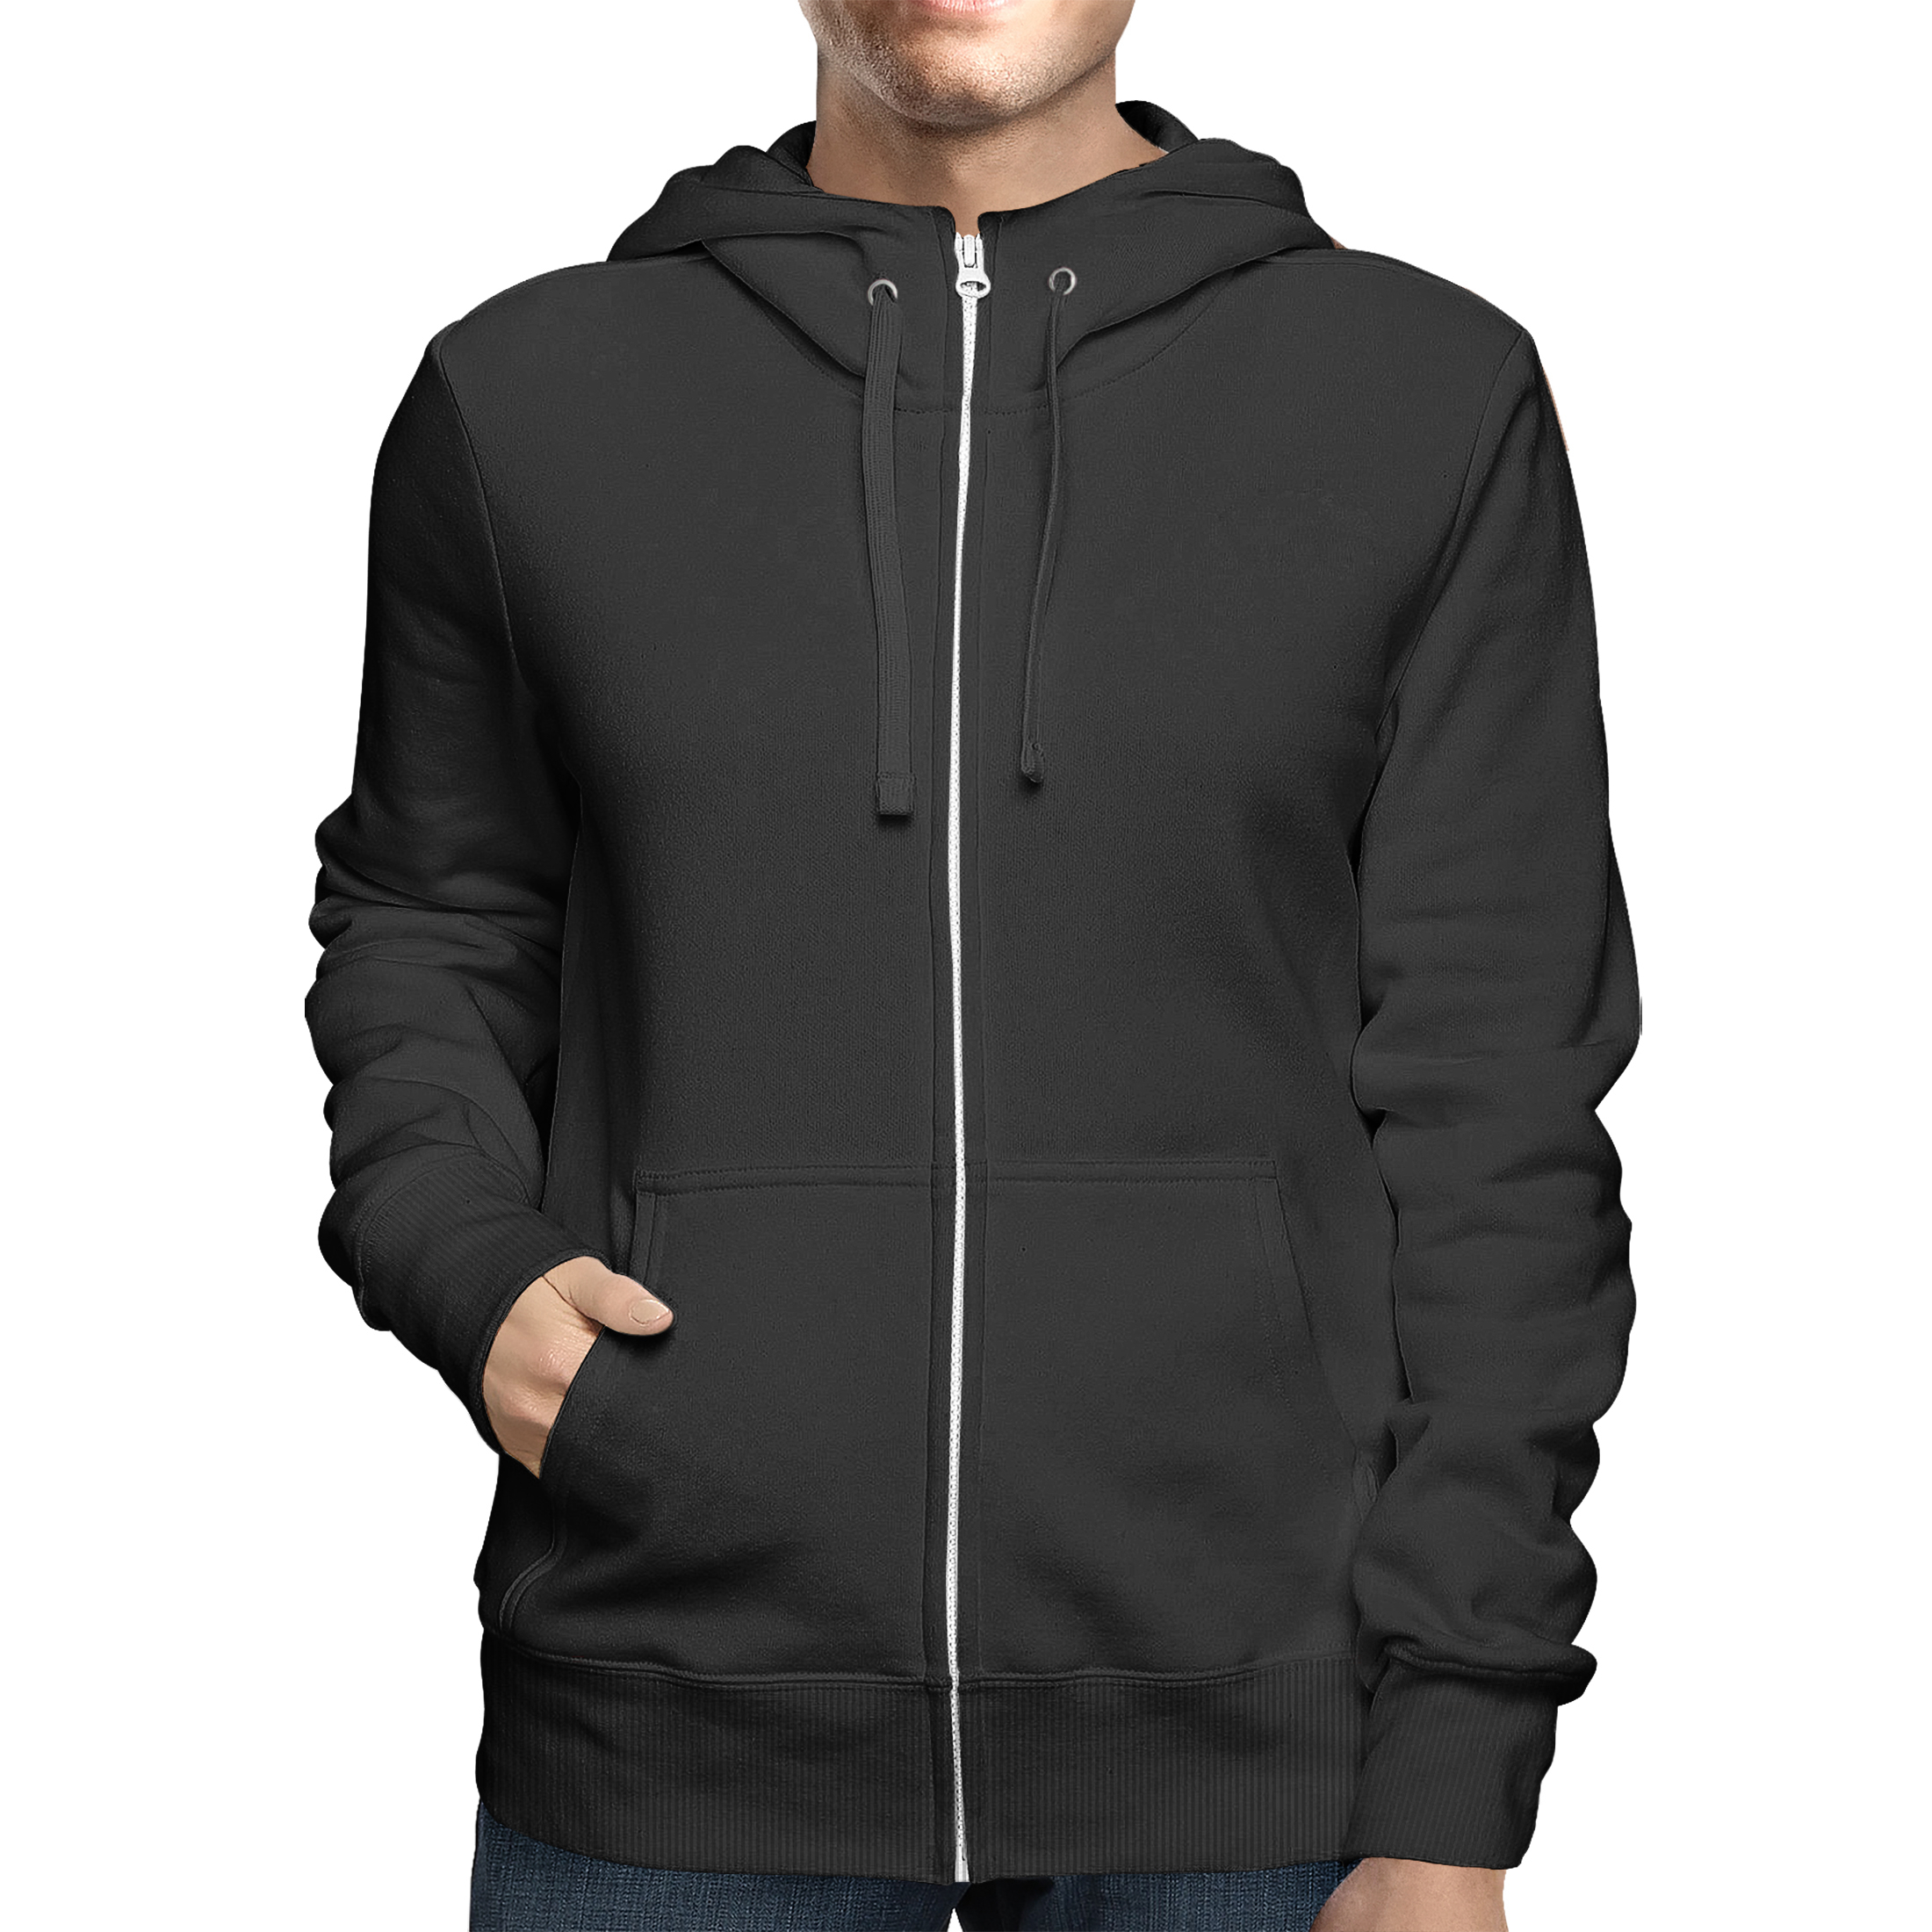 2-Pack: Men's Full Zip Up Fleece-Lined Hoodie Sweatshirt (Big & Tall Size Available) - Black, Large